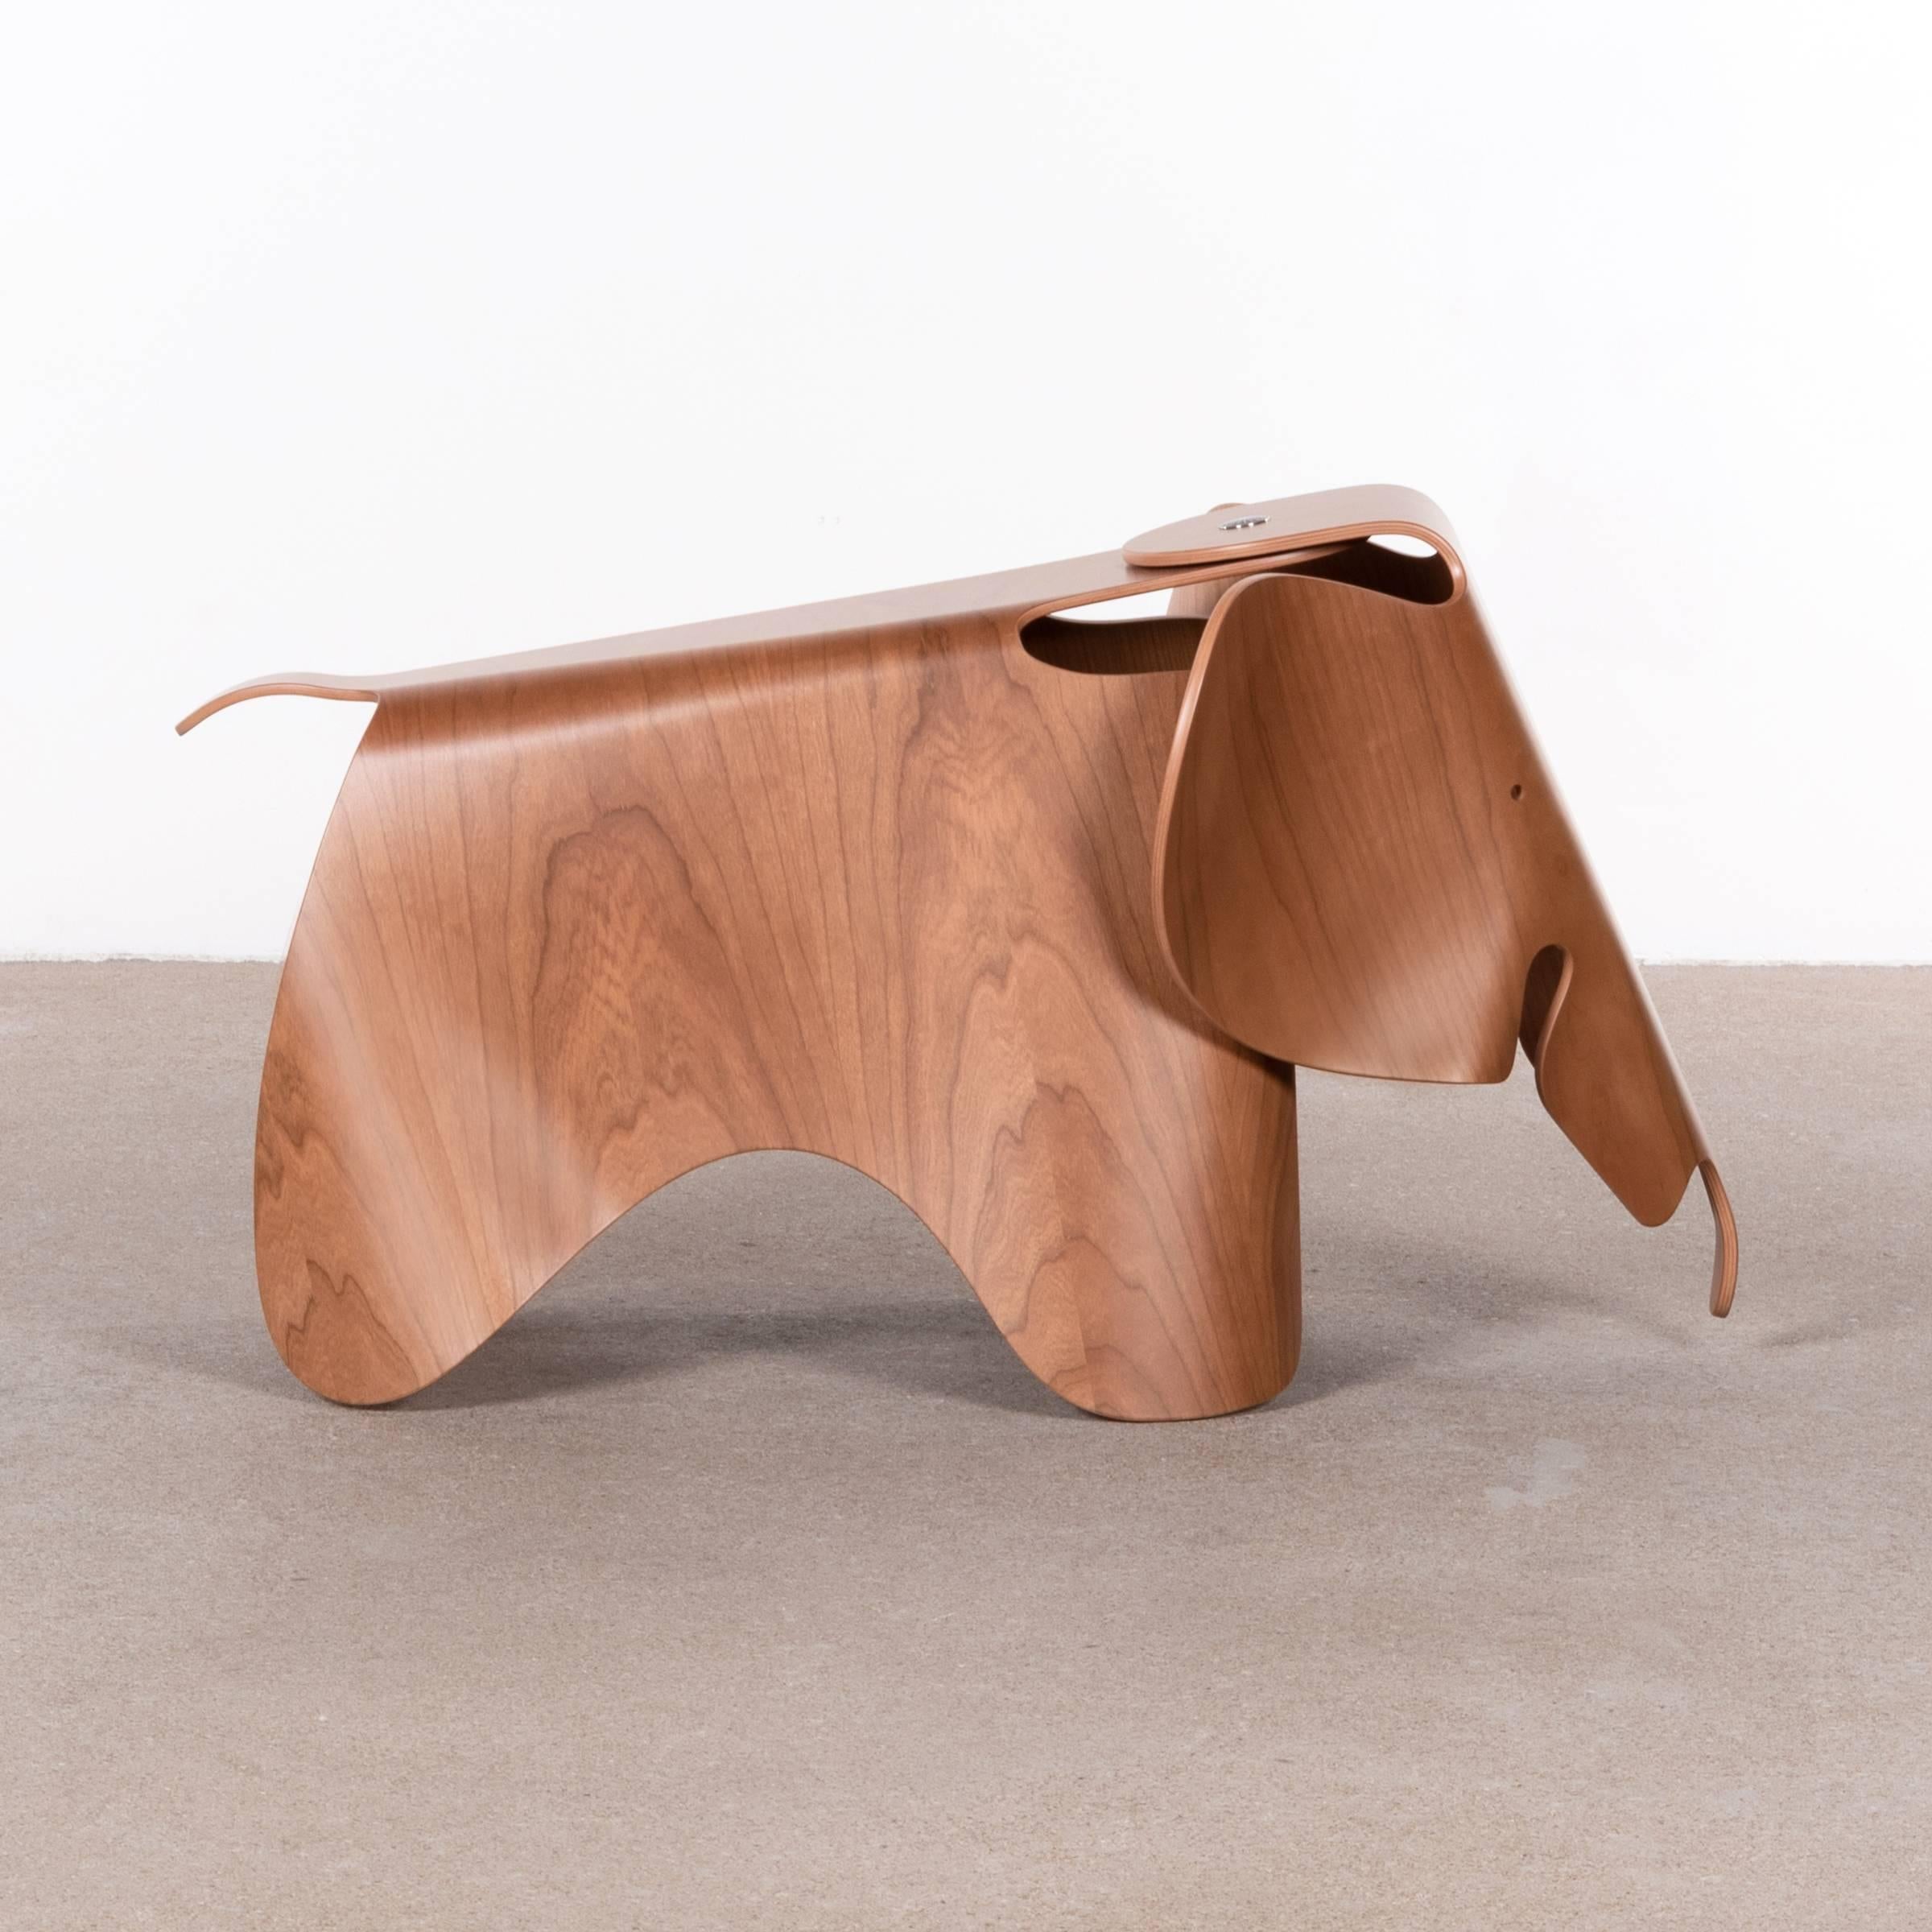 Charles and Ray Eames developed a toy elephant made of plywood in 1945, but the piece never went into production. After a limited edition in 2007, Vitra has now launched serial production of the Eames elephant in plywood for the very first time.